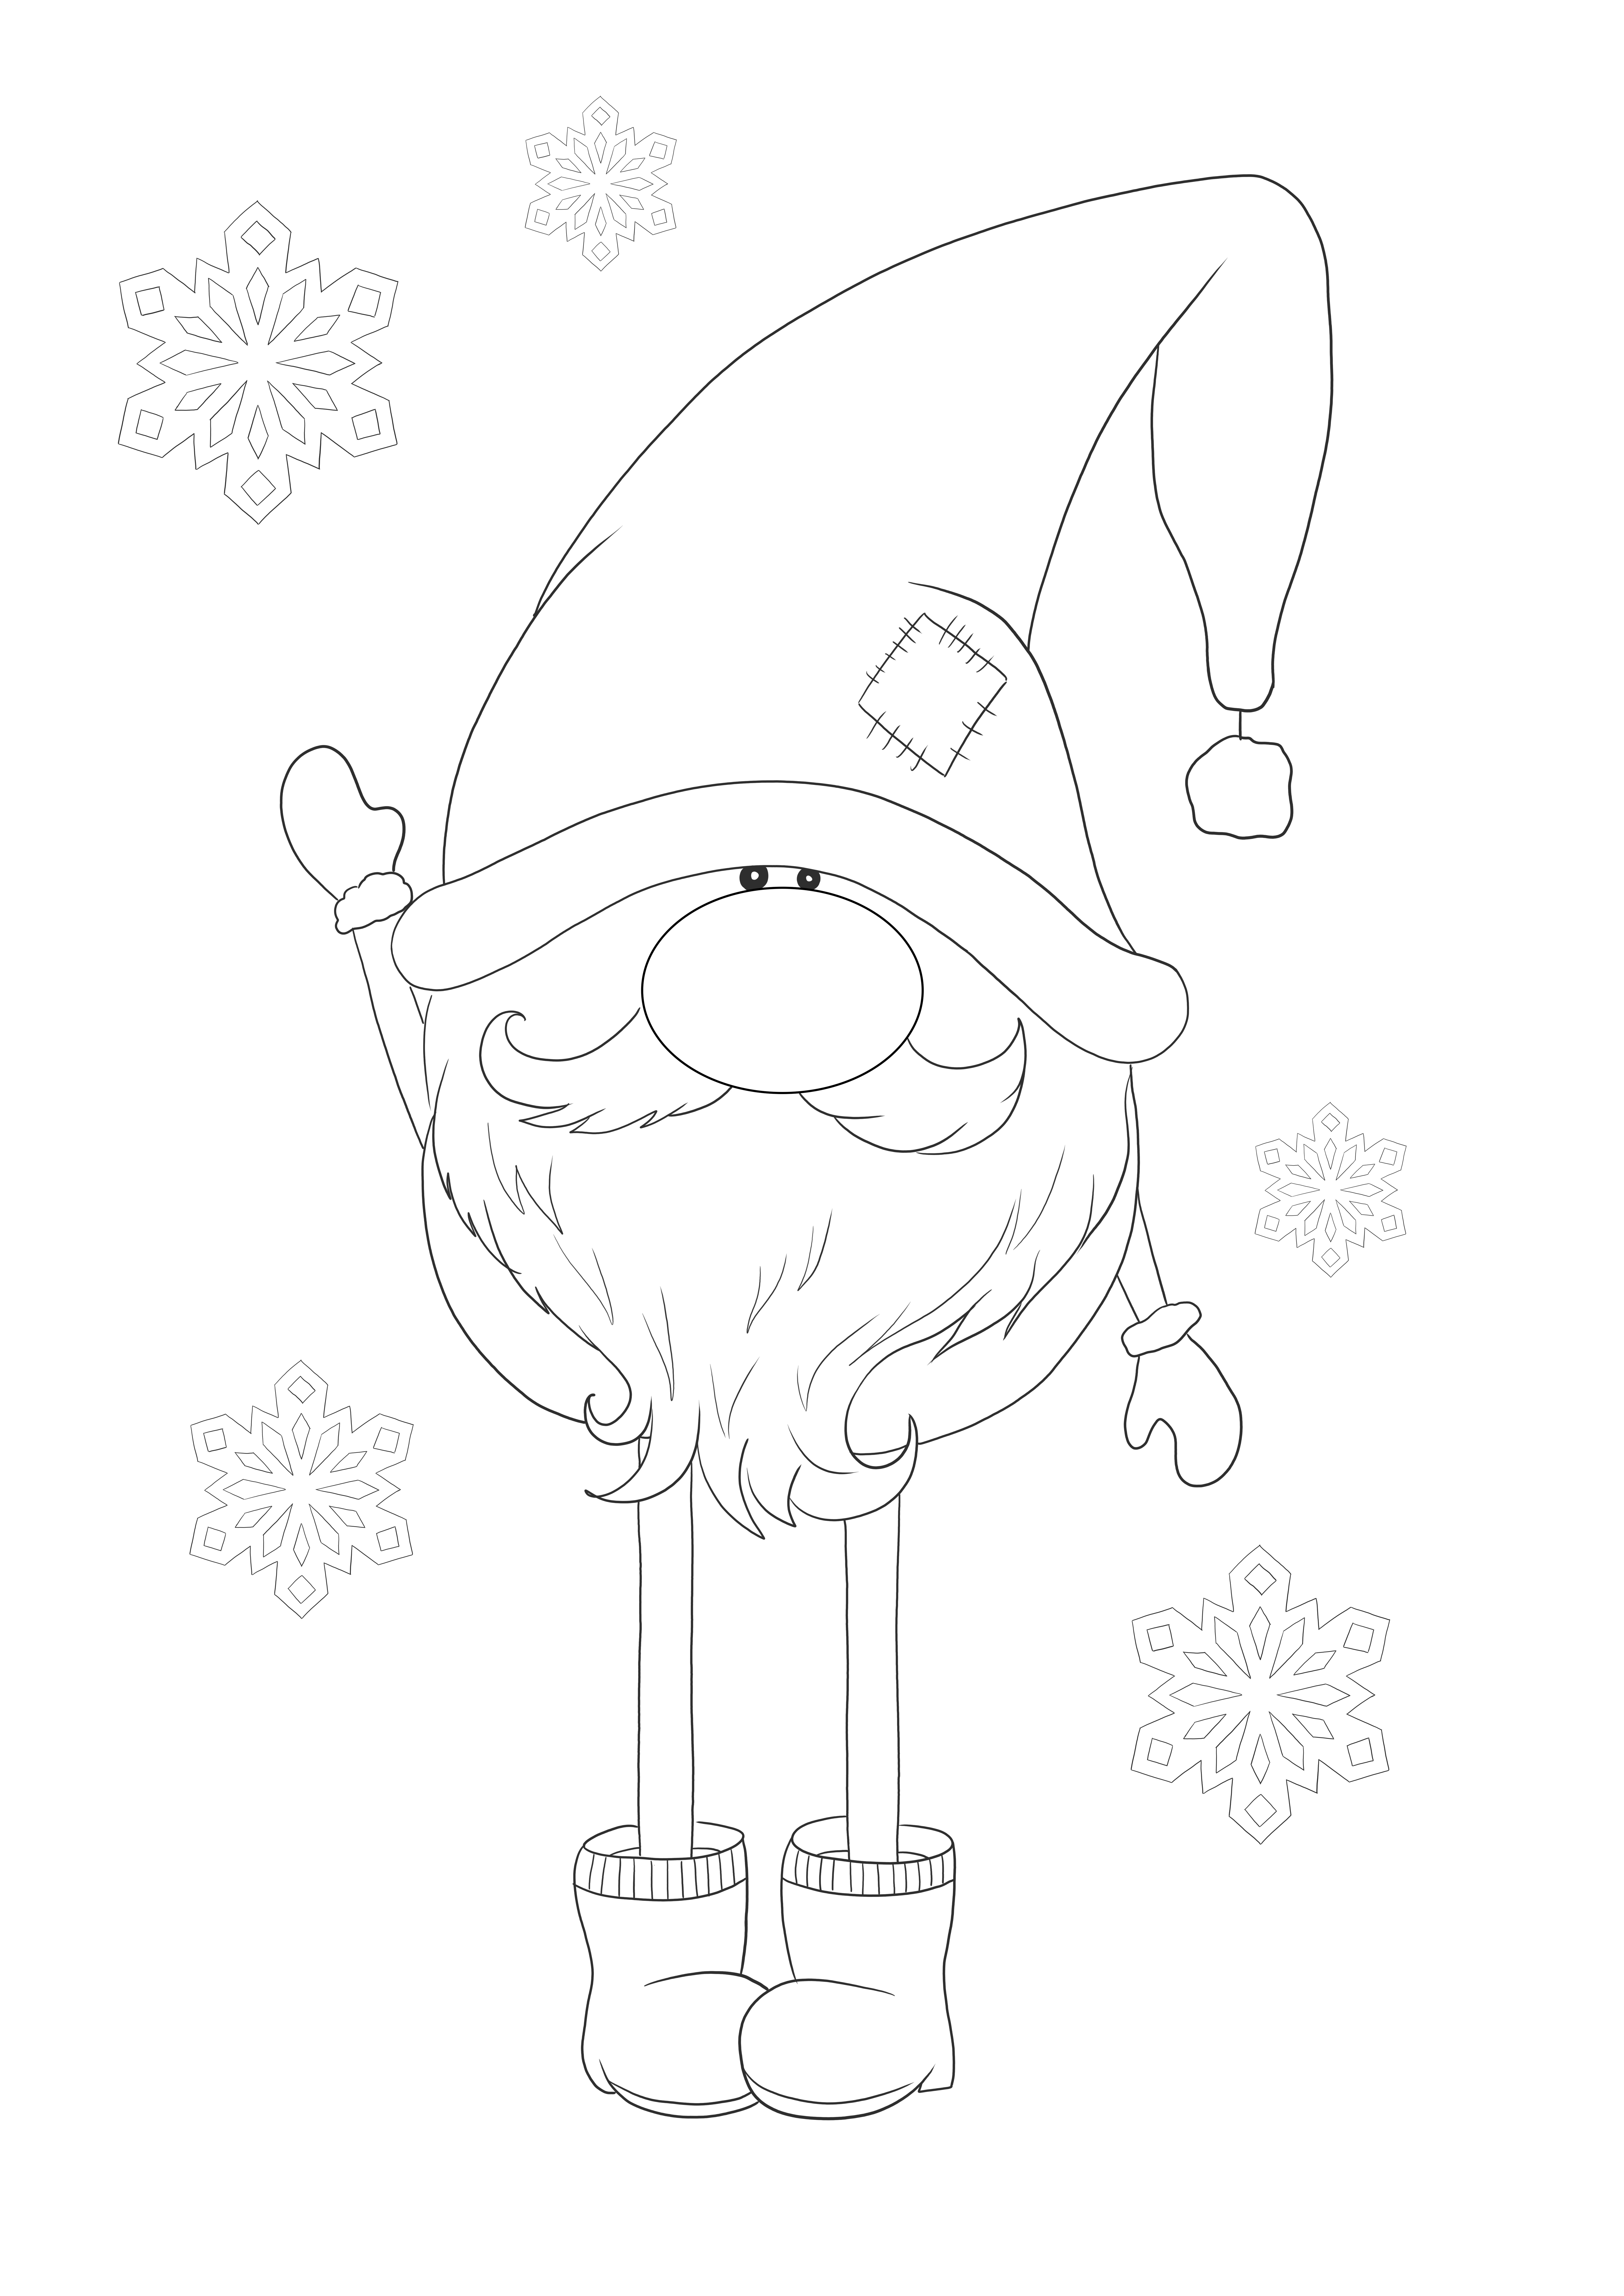 Cute Elf welcoming winter free to download and color for kids